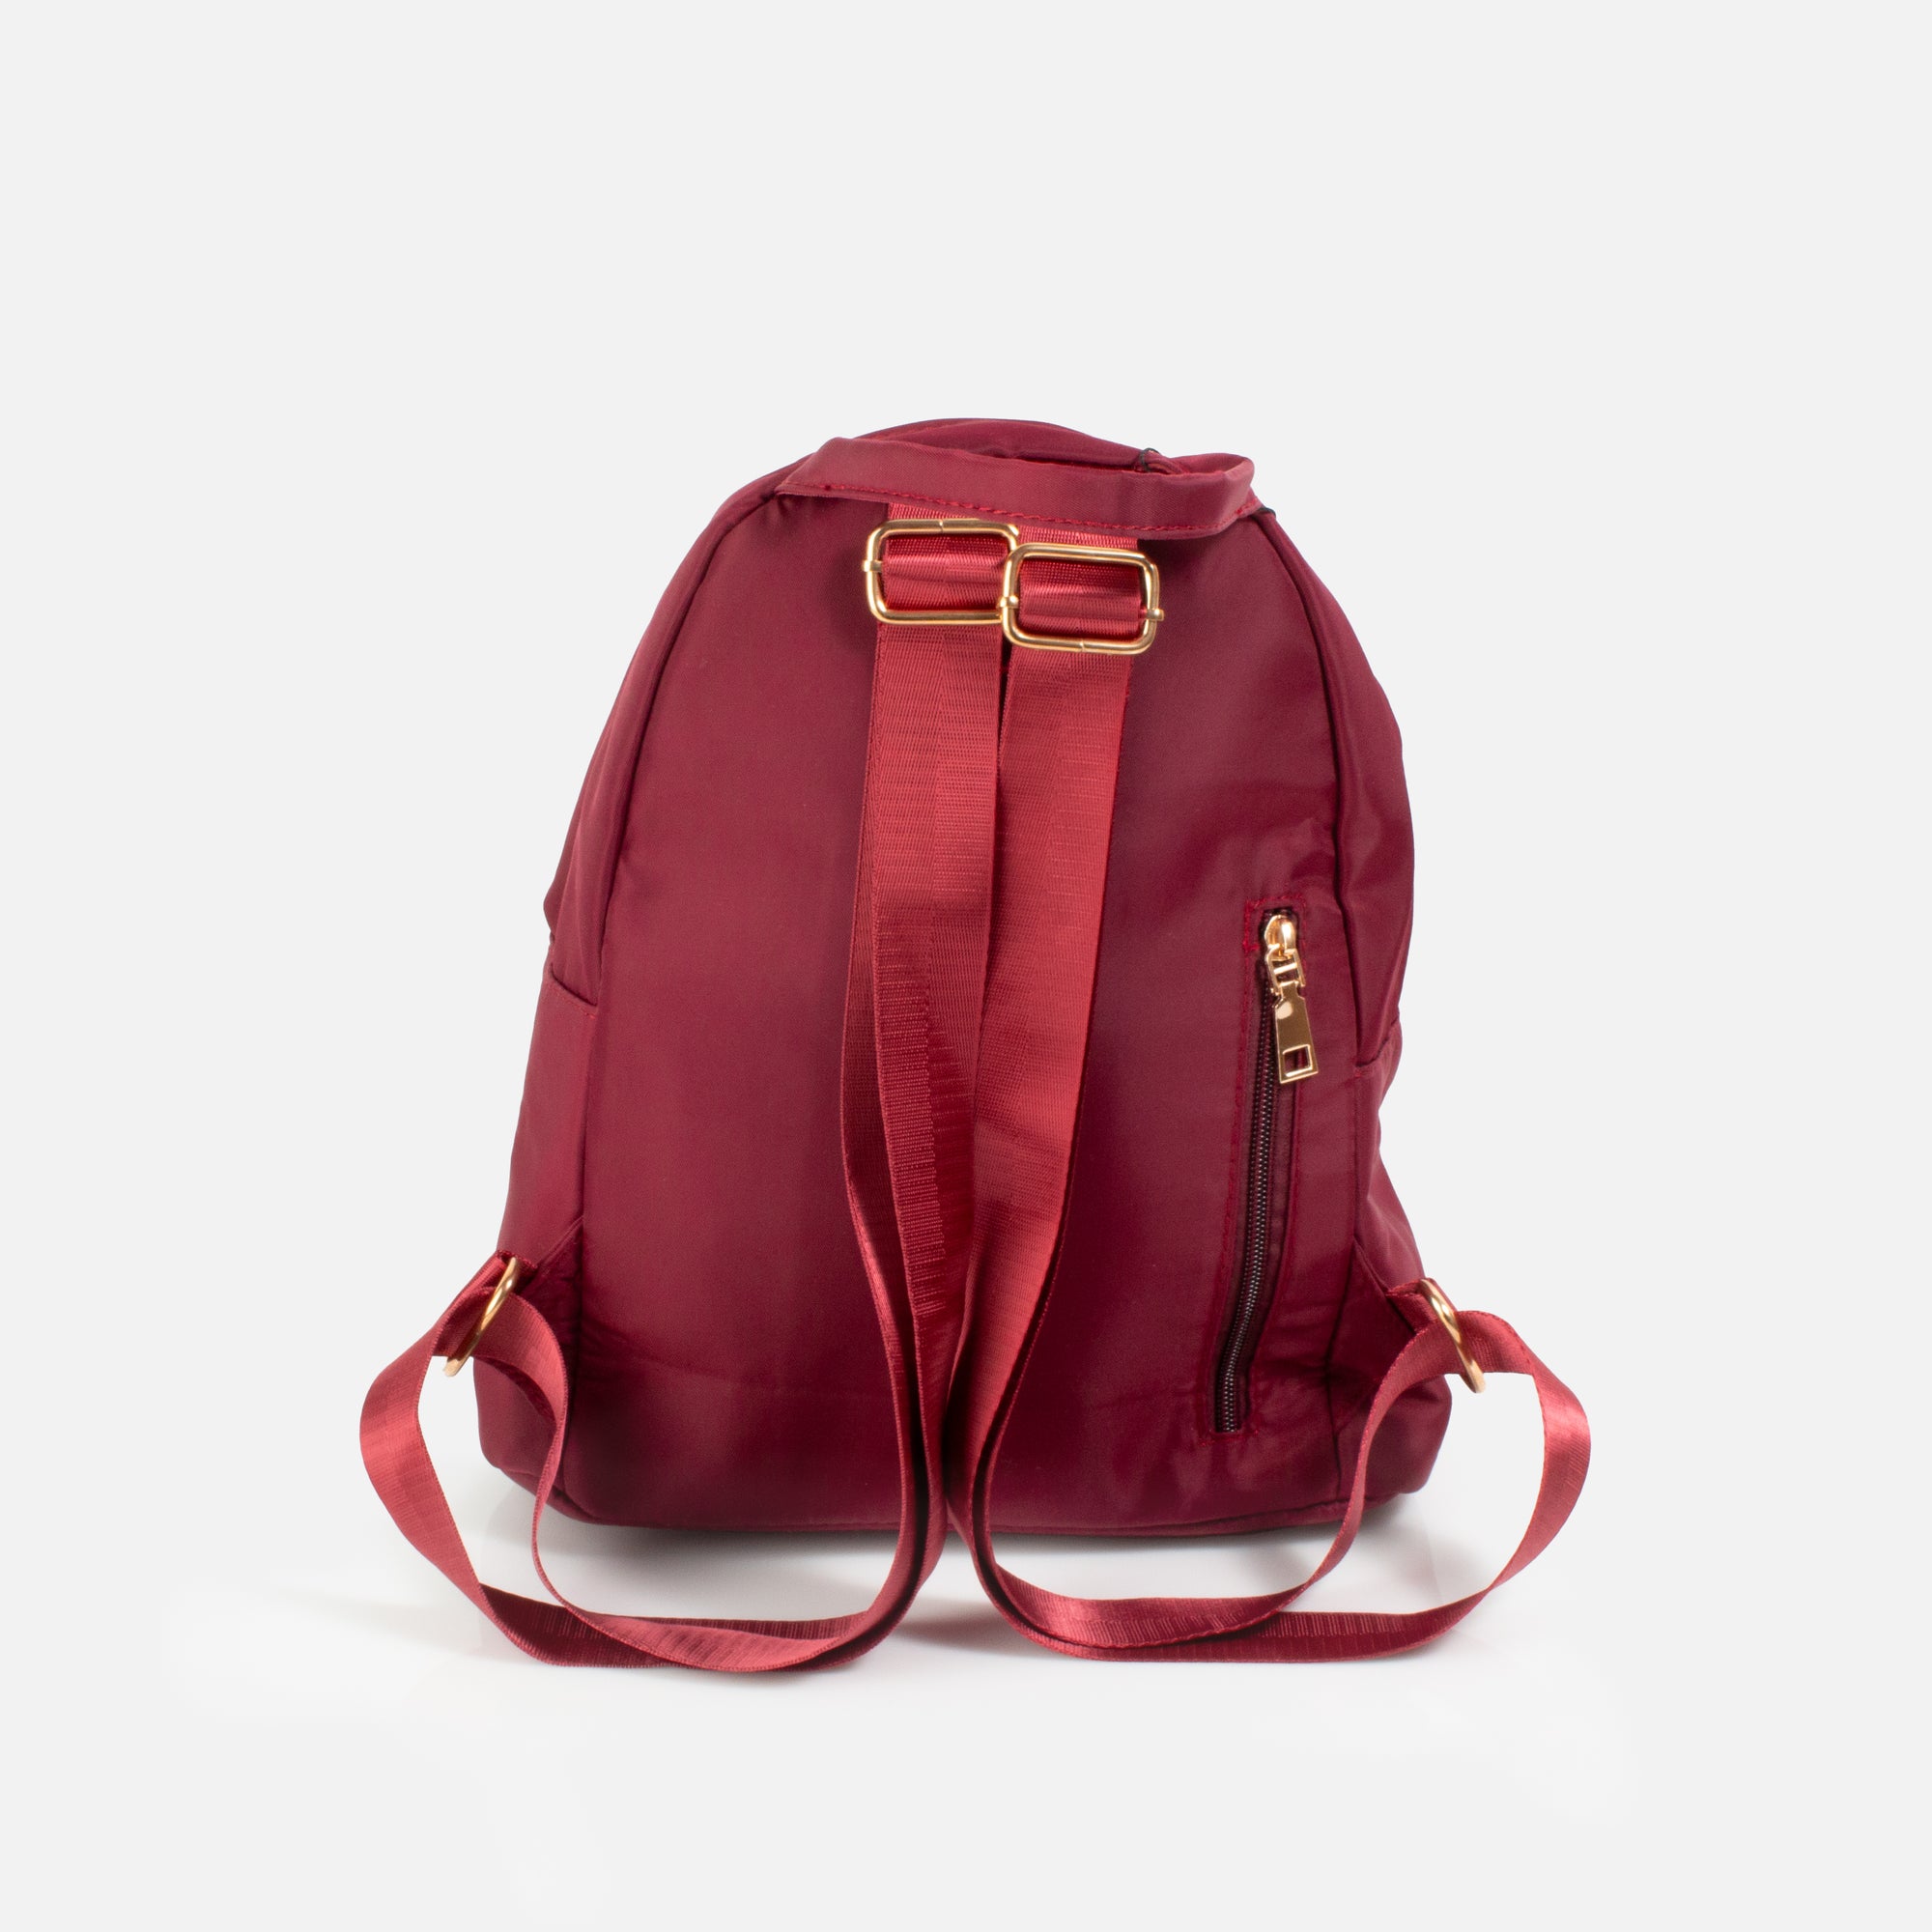 Wine red backpack